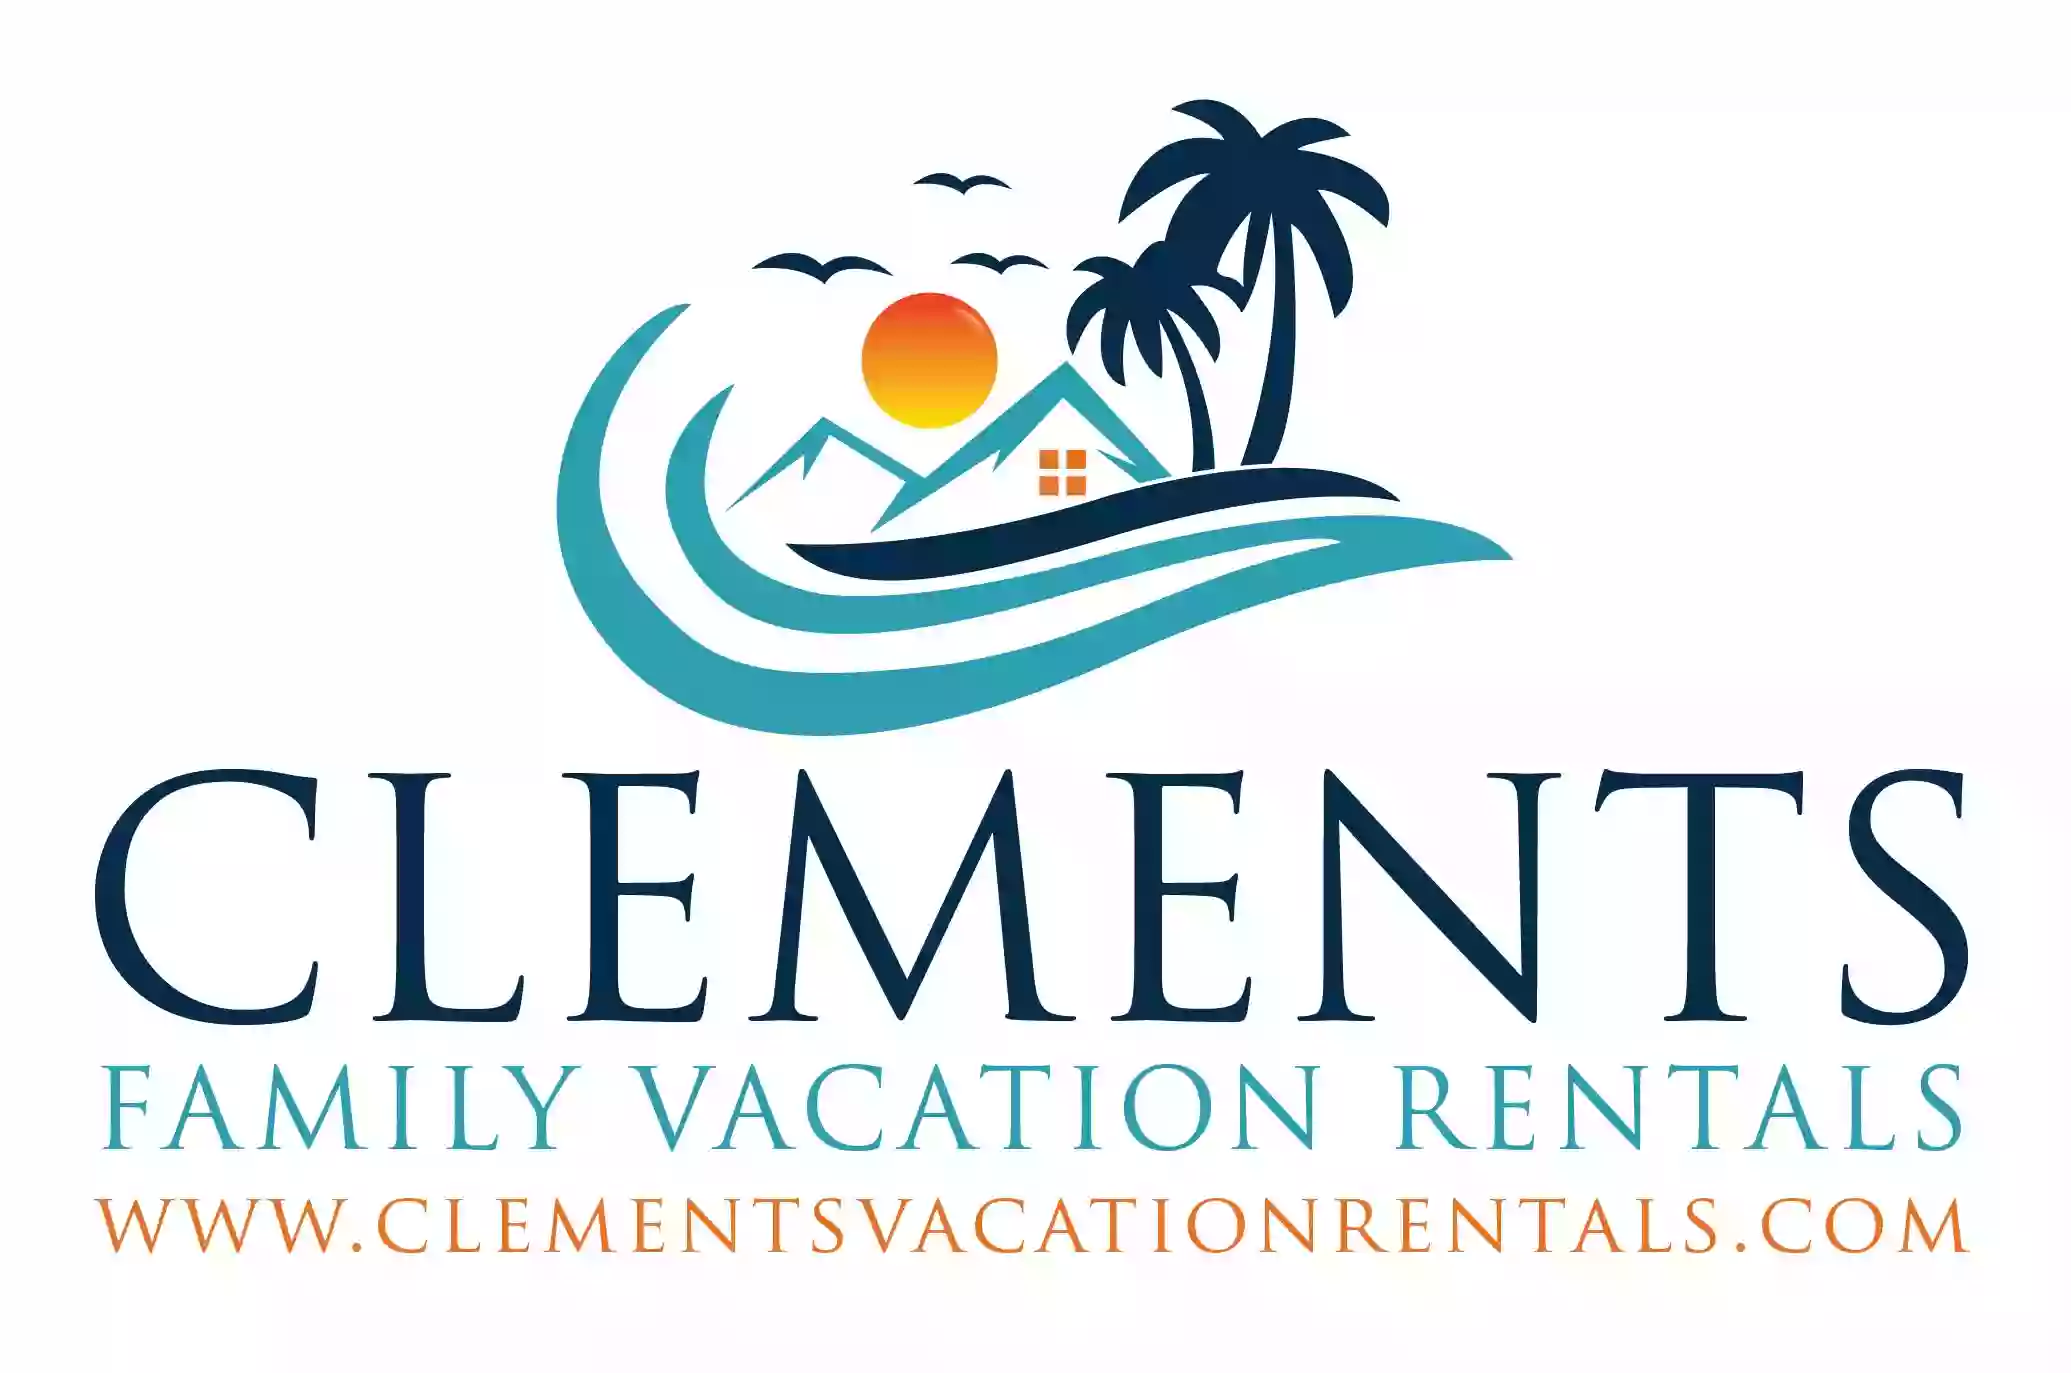 Clements Family Vacation Rentals